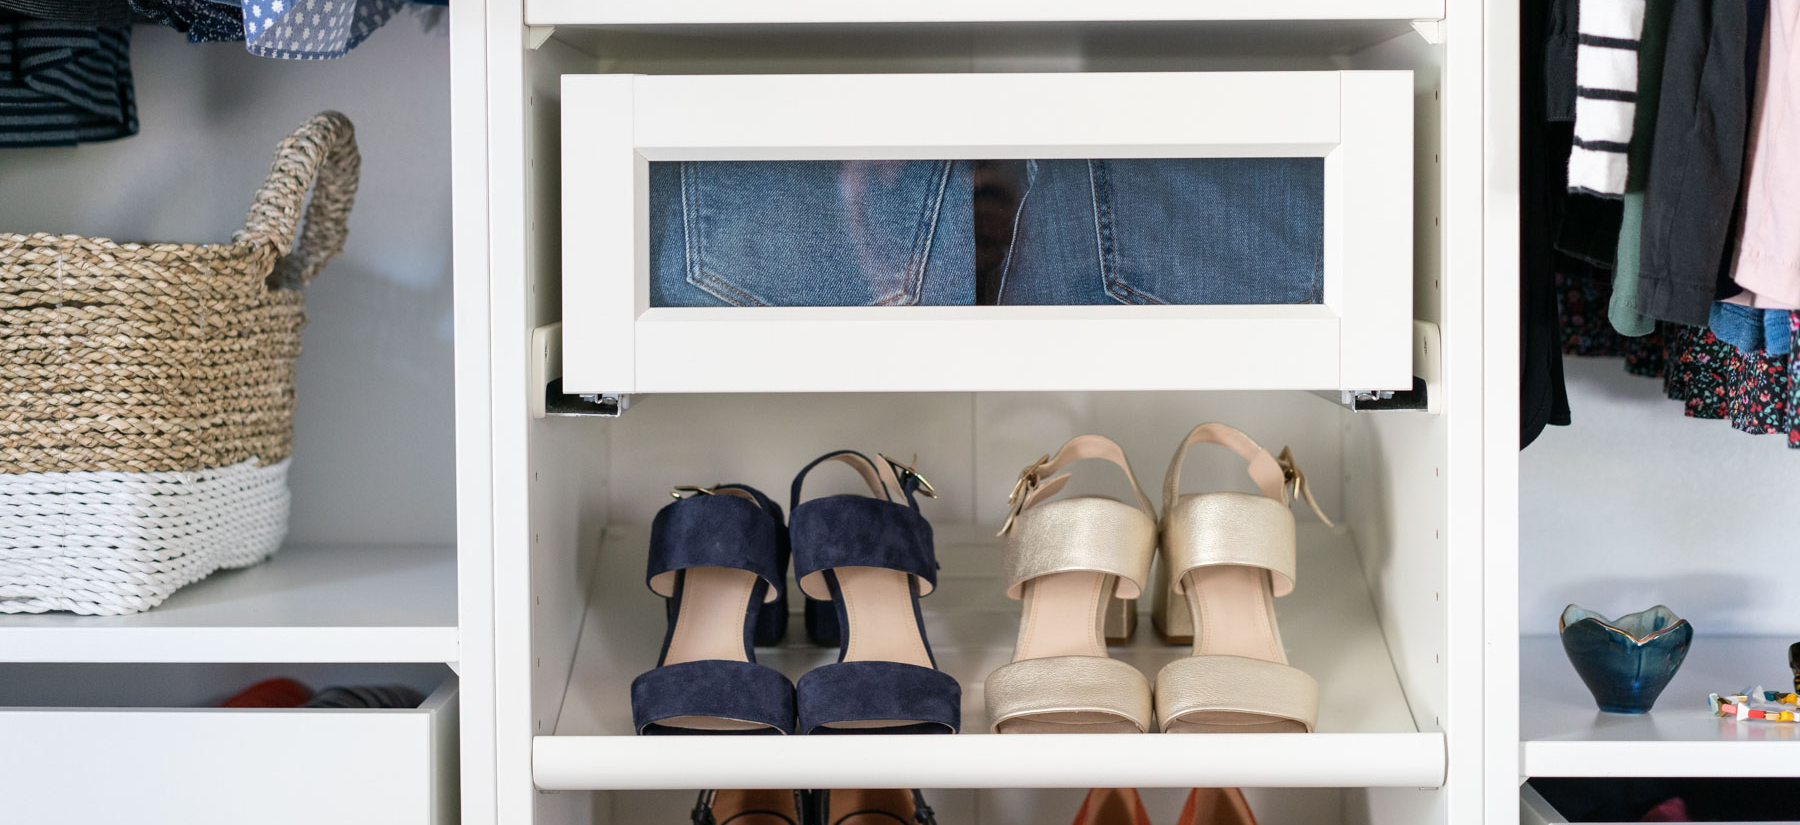 How to organize the inside of your PAX wardrobe - IKEA